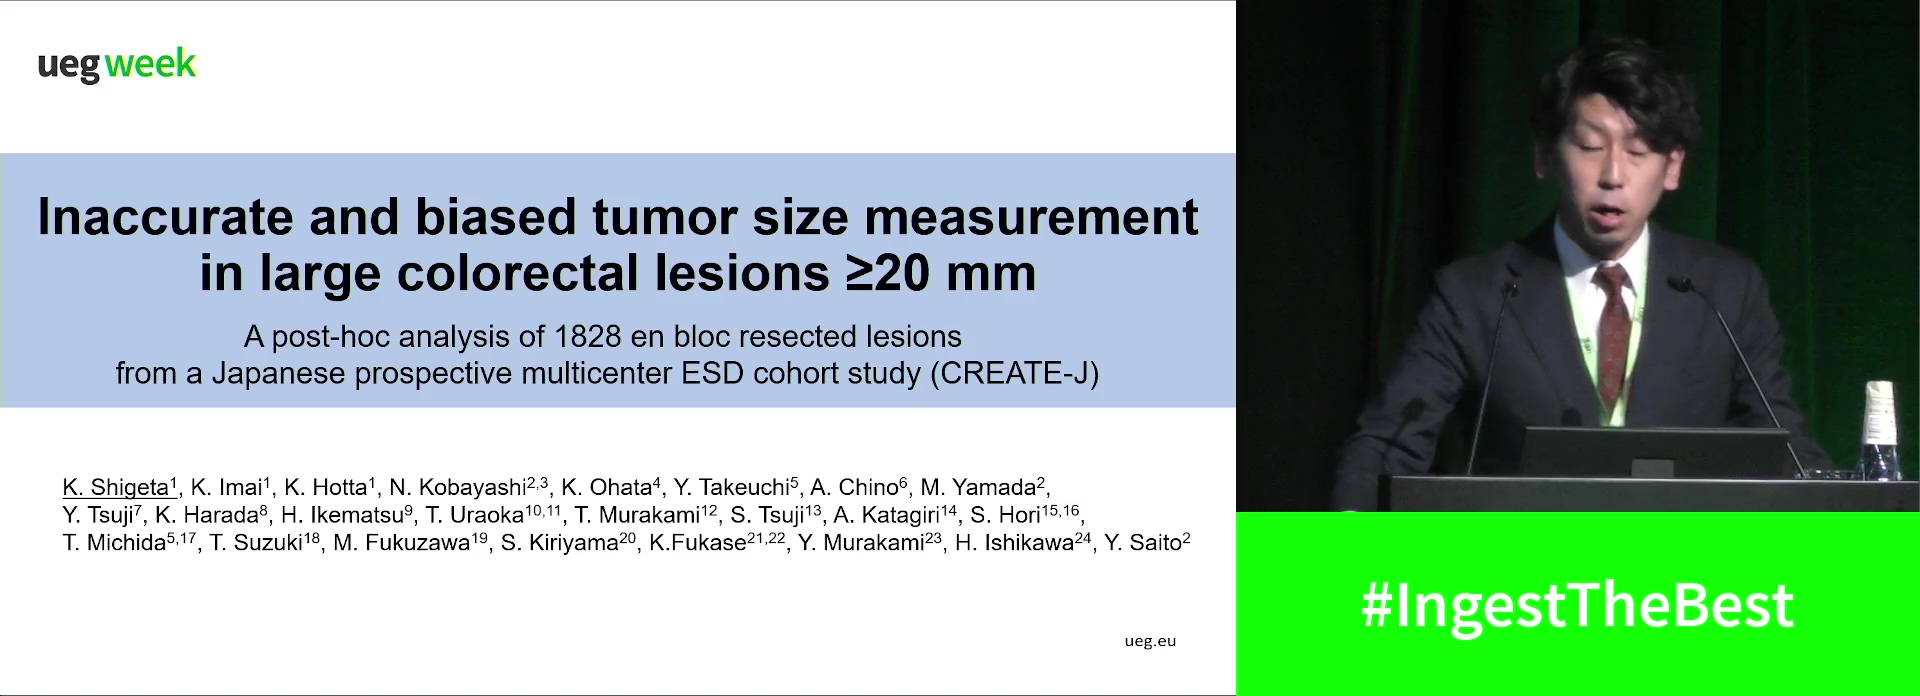 INACCURATE AND BIASED TUMOR SIZE MEASUREMENT IN LARGE COLORECTAL LESIONS ≥20 MM; A POST-HOC ANALYSIS OF 1828 EN BLOC RESECTED LESIONS FROM A JAPANESE PROSPECTIVE MULTICENTER ESD COHORT STUDY (CREATE-J)